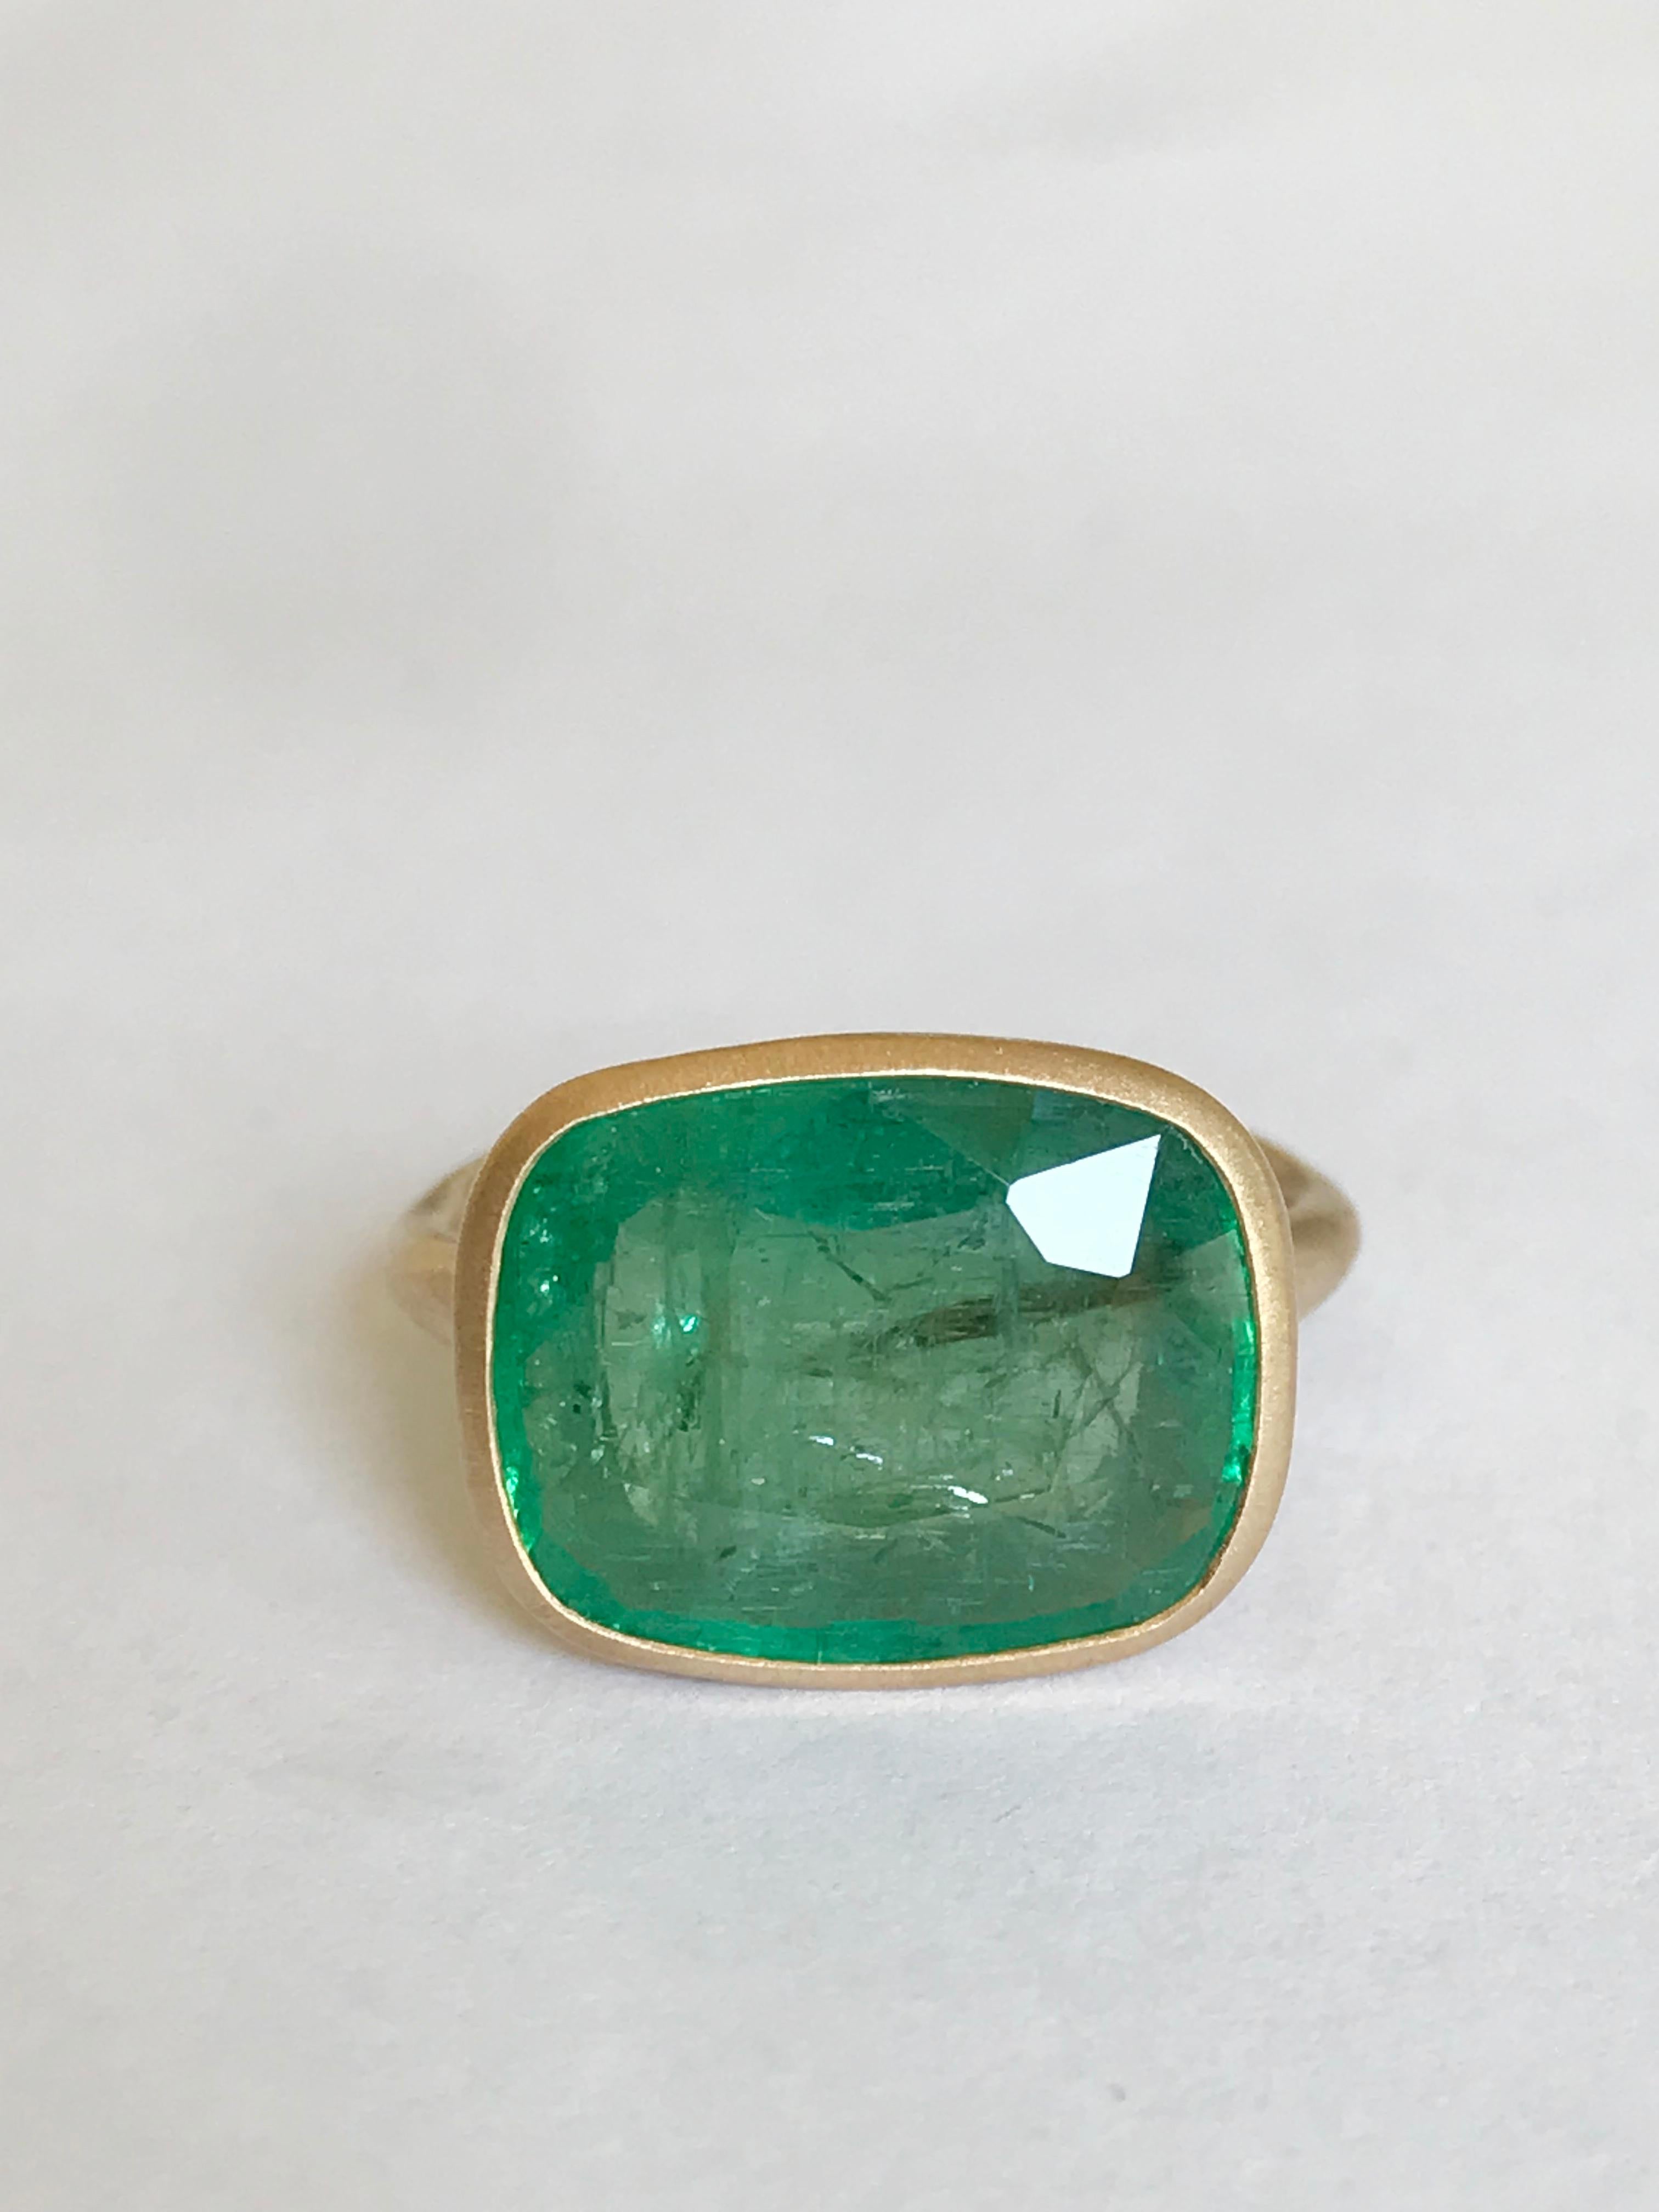 Dalben design One of a Kind 18k yellow gold matte finishing ring with a 8,08 carat bezel-set cushion cut emerald. 
Ring size 7 1/4 USA - EU 55 re-sizable to some finger sizes. 
The emerald have natural visible inclusions .
Bezel stone dimensions